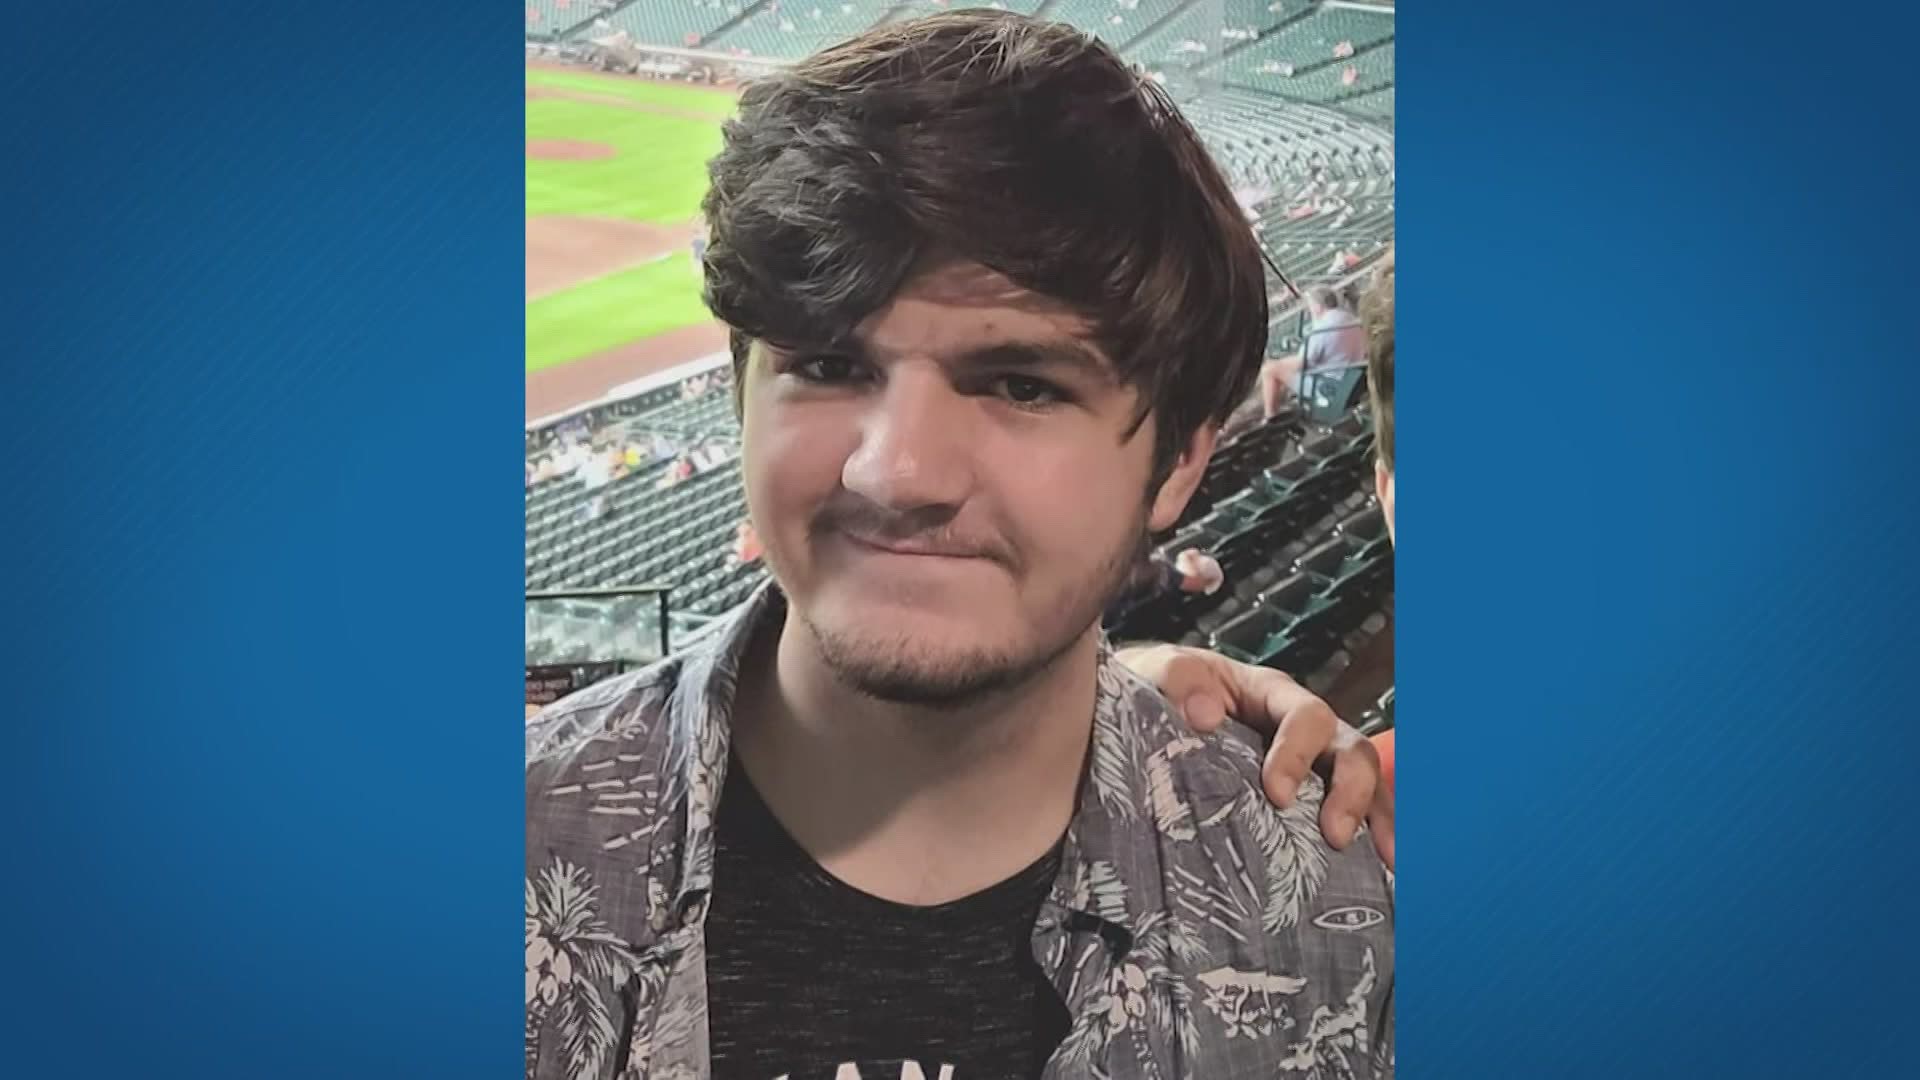 The father of a teen who was shot as he was leaving an Astros game Tuesday night said the world lost a soul that “would have added to our world and made it better."